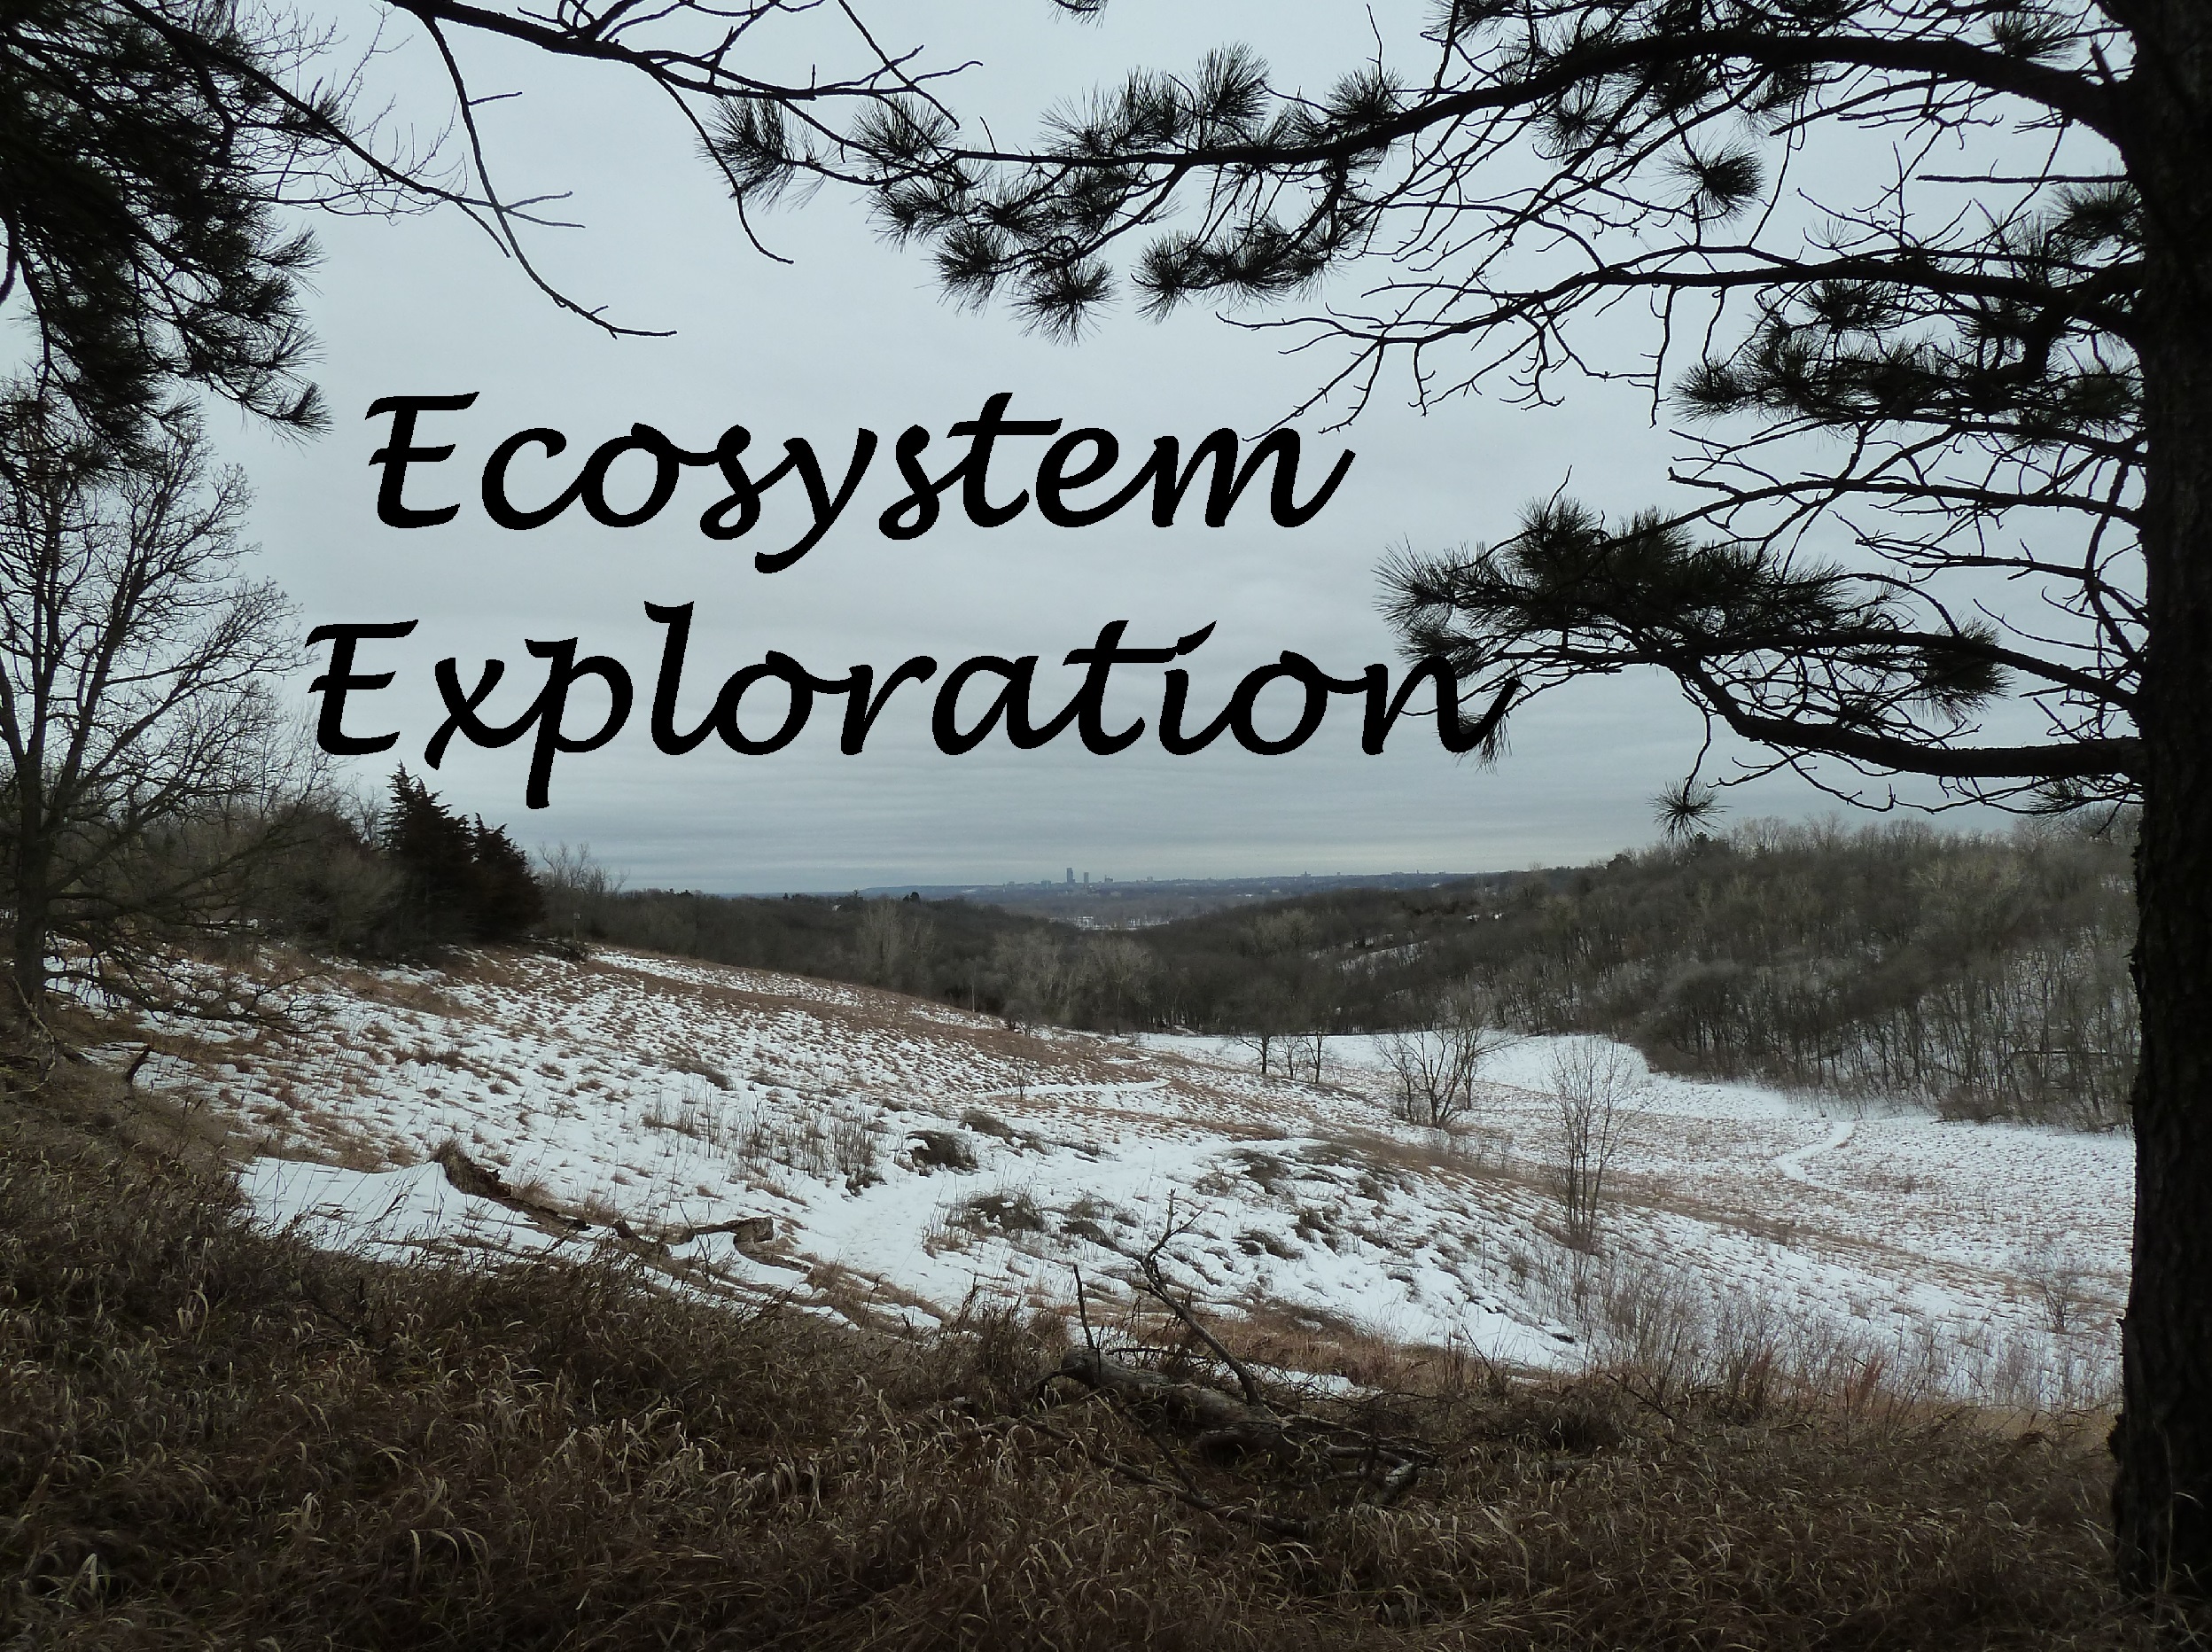 a picture of white ground looking through trees with the text, "Ecosystem Exploration"